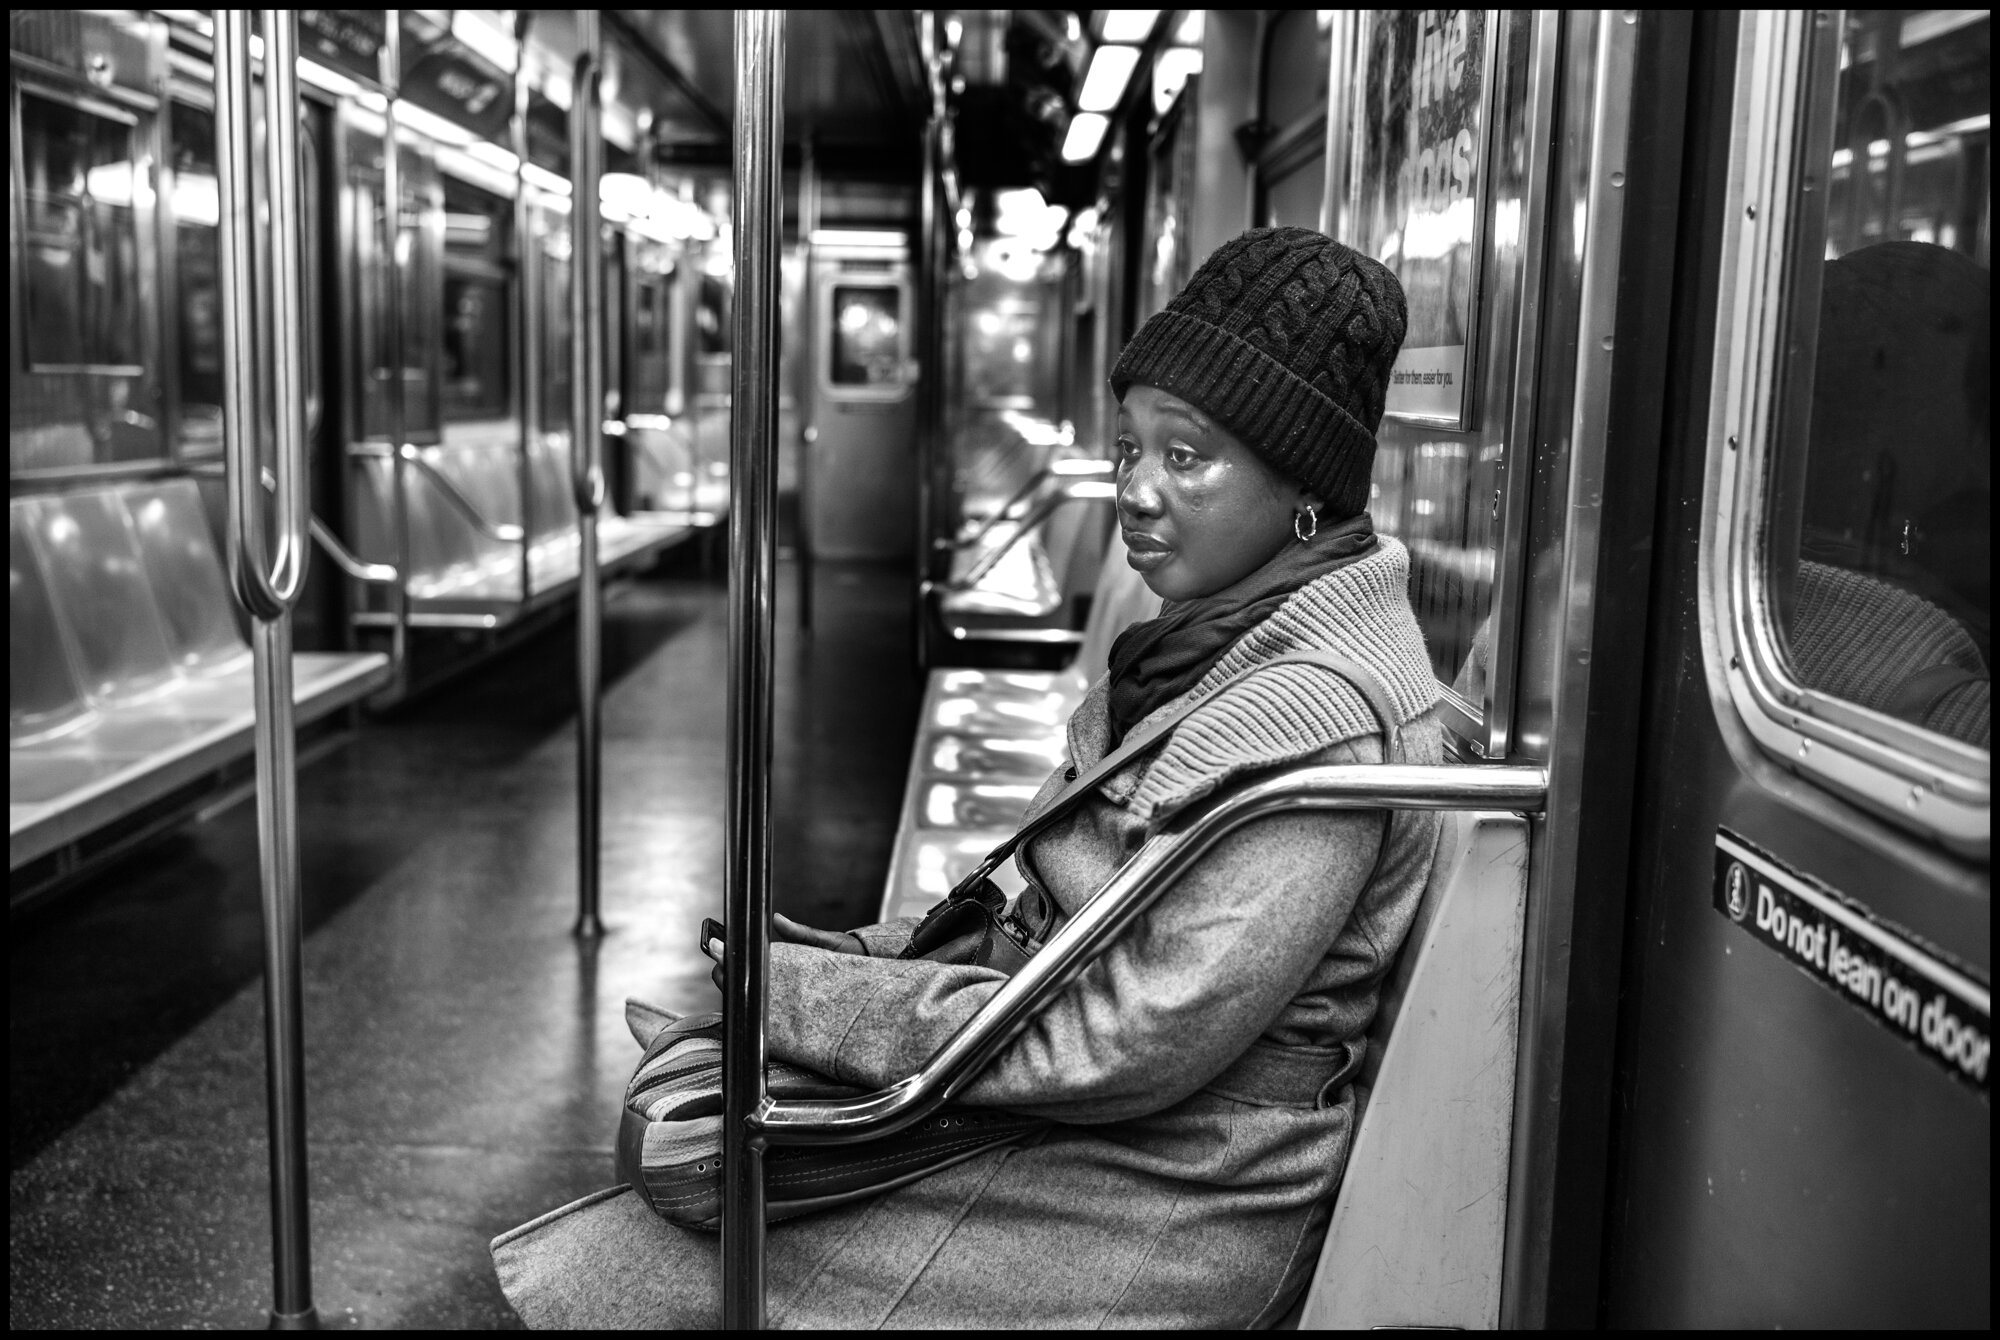  Sandra, 30, from W. Africa, rides the #1 train south alone as the only passenger in this subway car.   March 26, 2020. © Peter Turnley.   ID# 04-005 